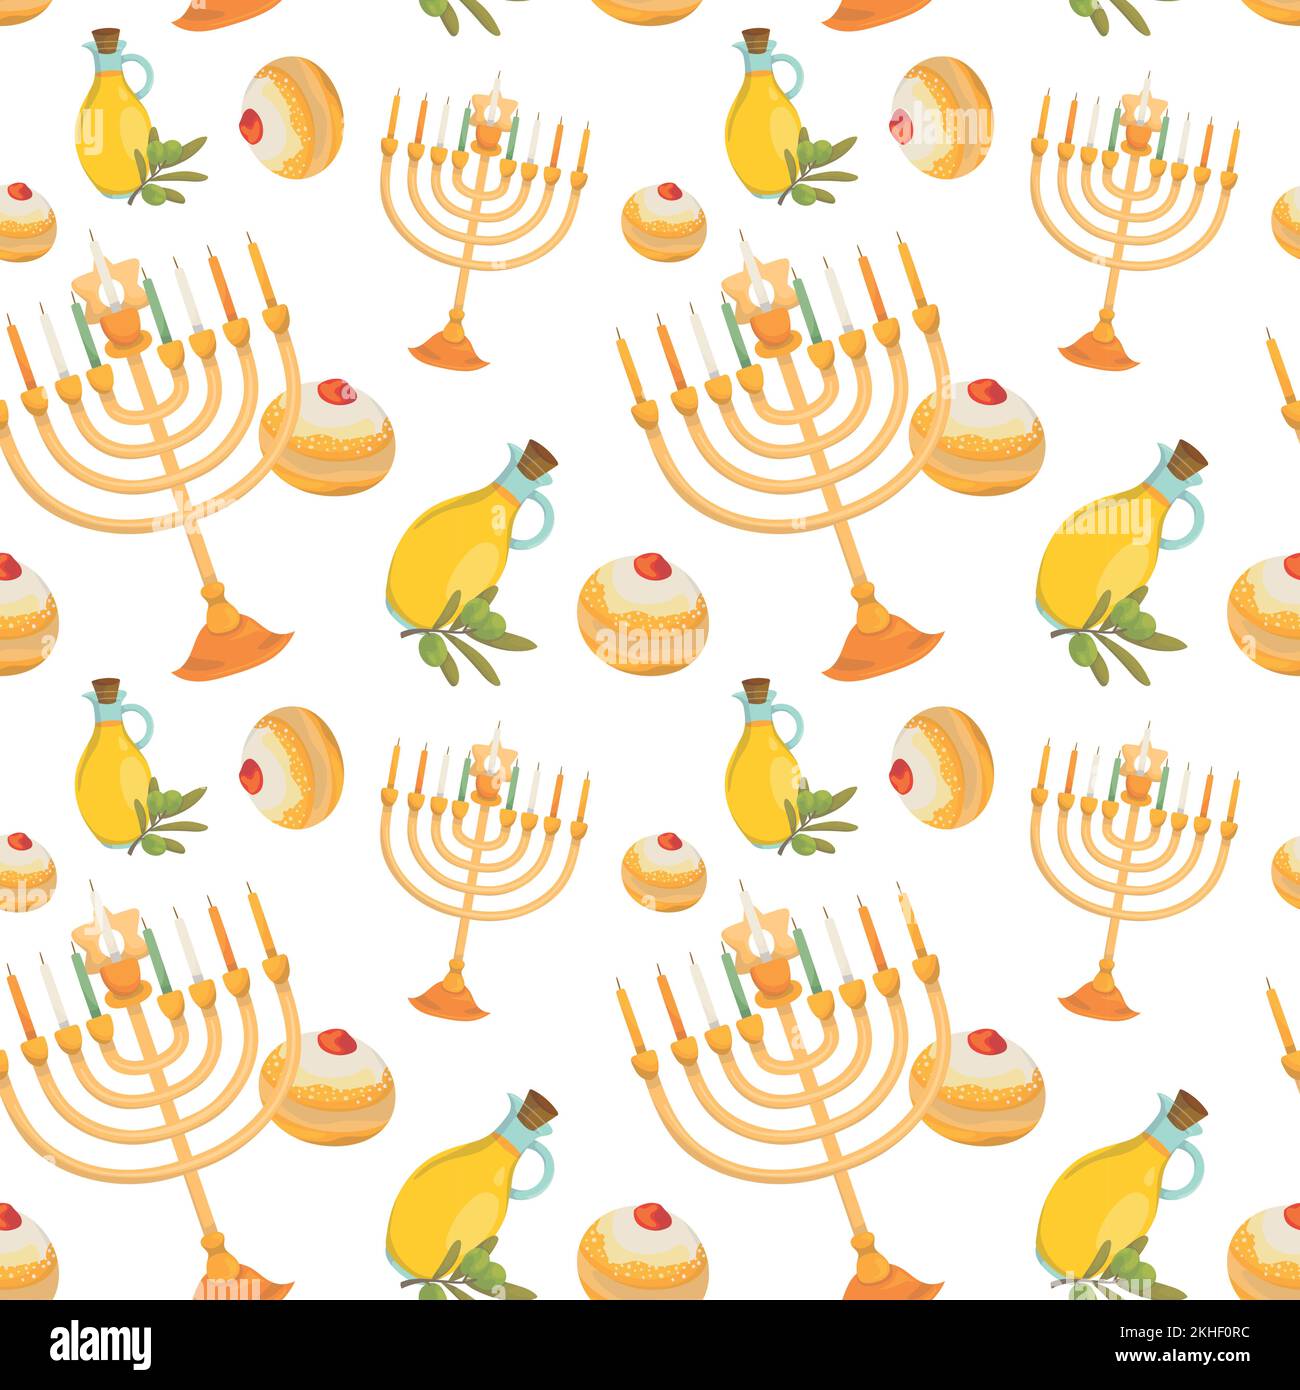 Colorful repetitive pattern background for the Jewish festival of Hanukkah, made of simple vector illustrations. Stock Vector